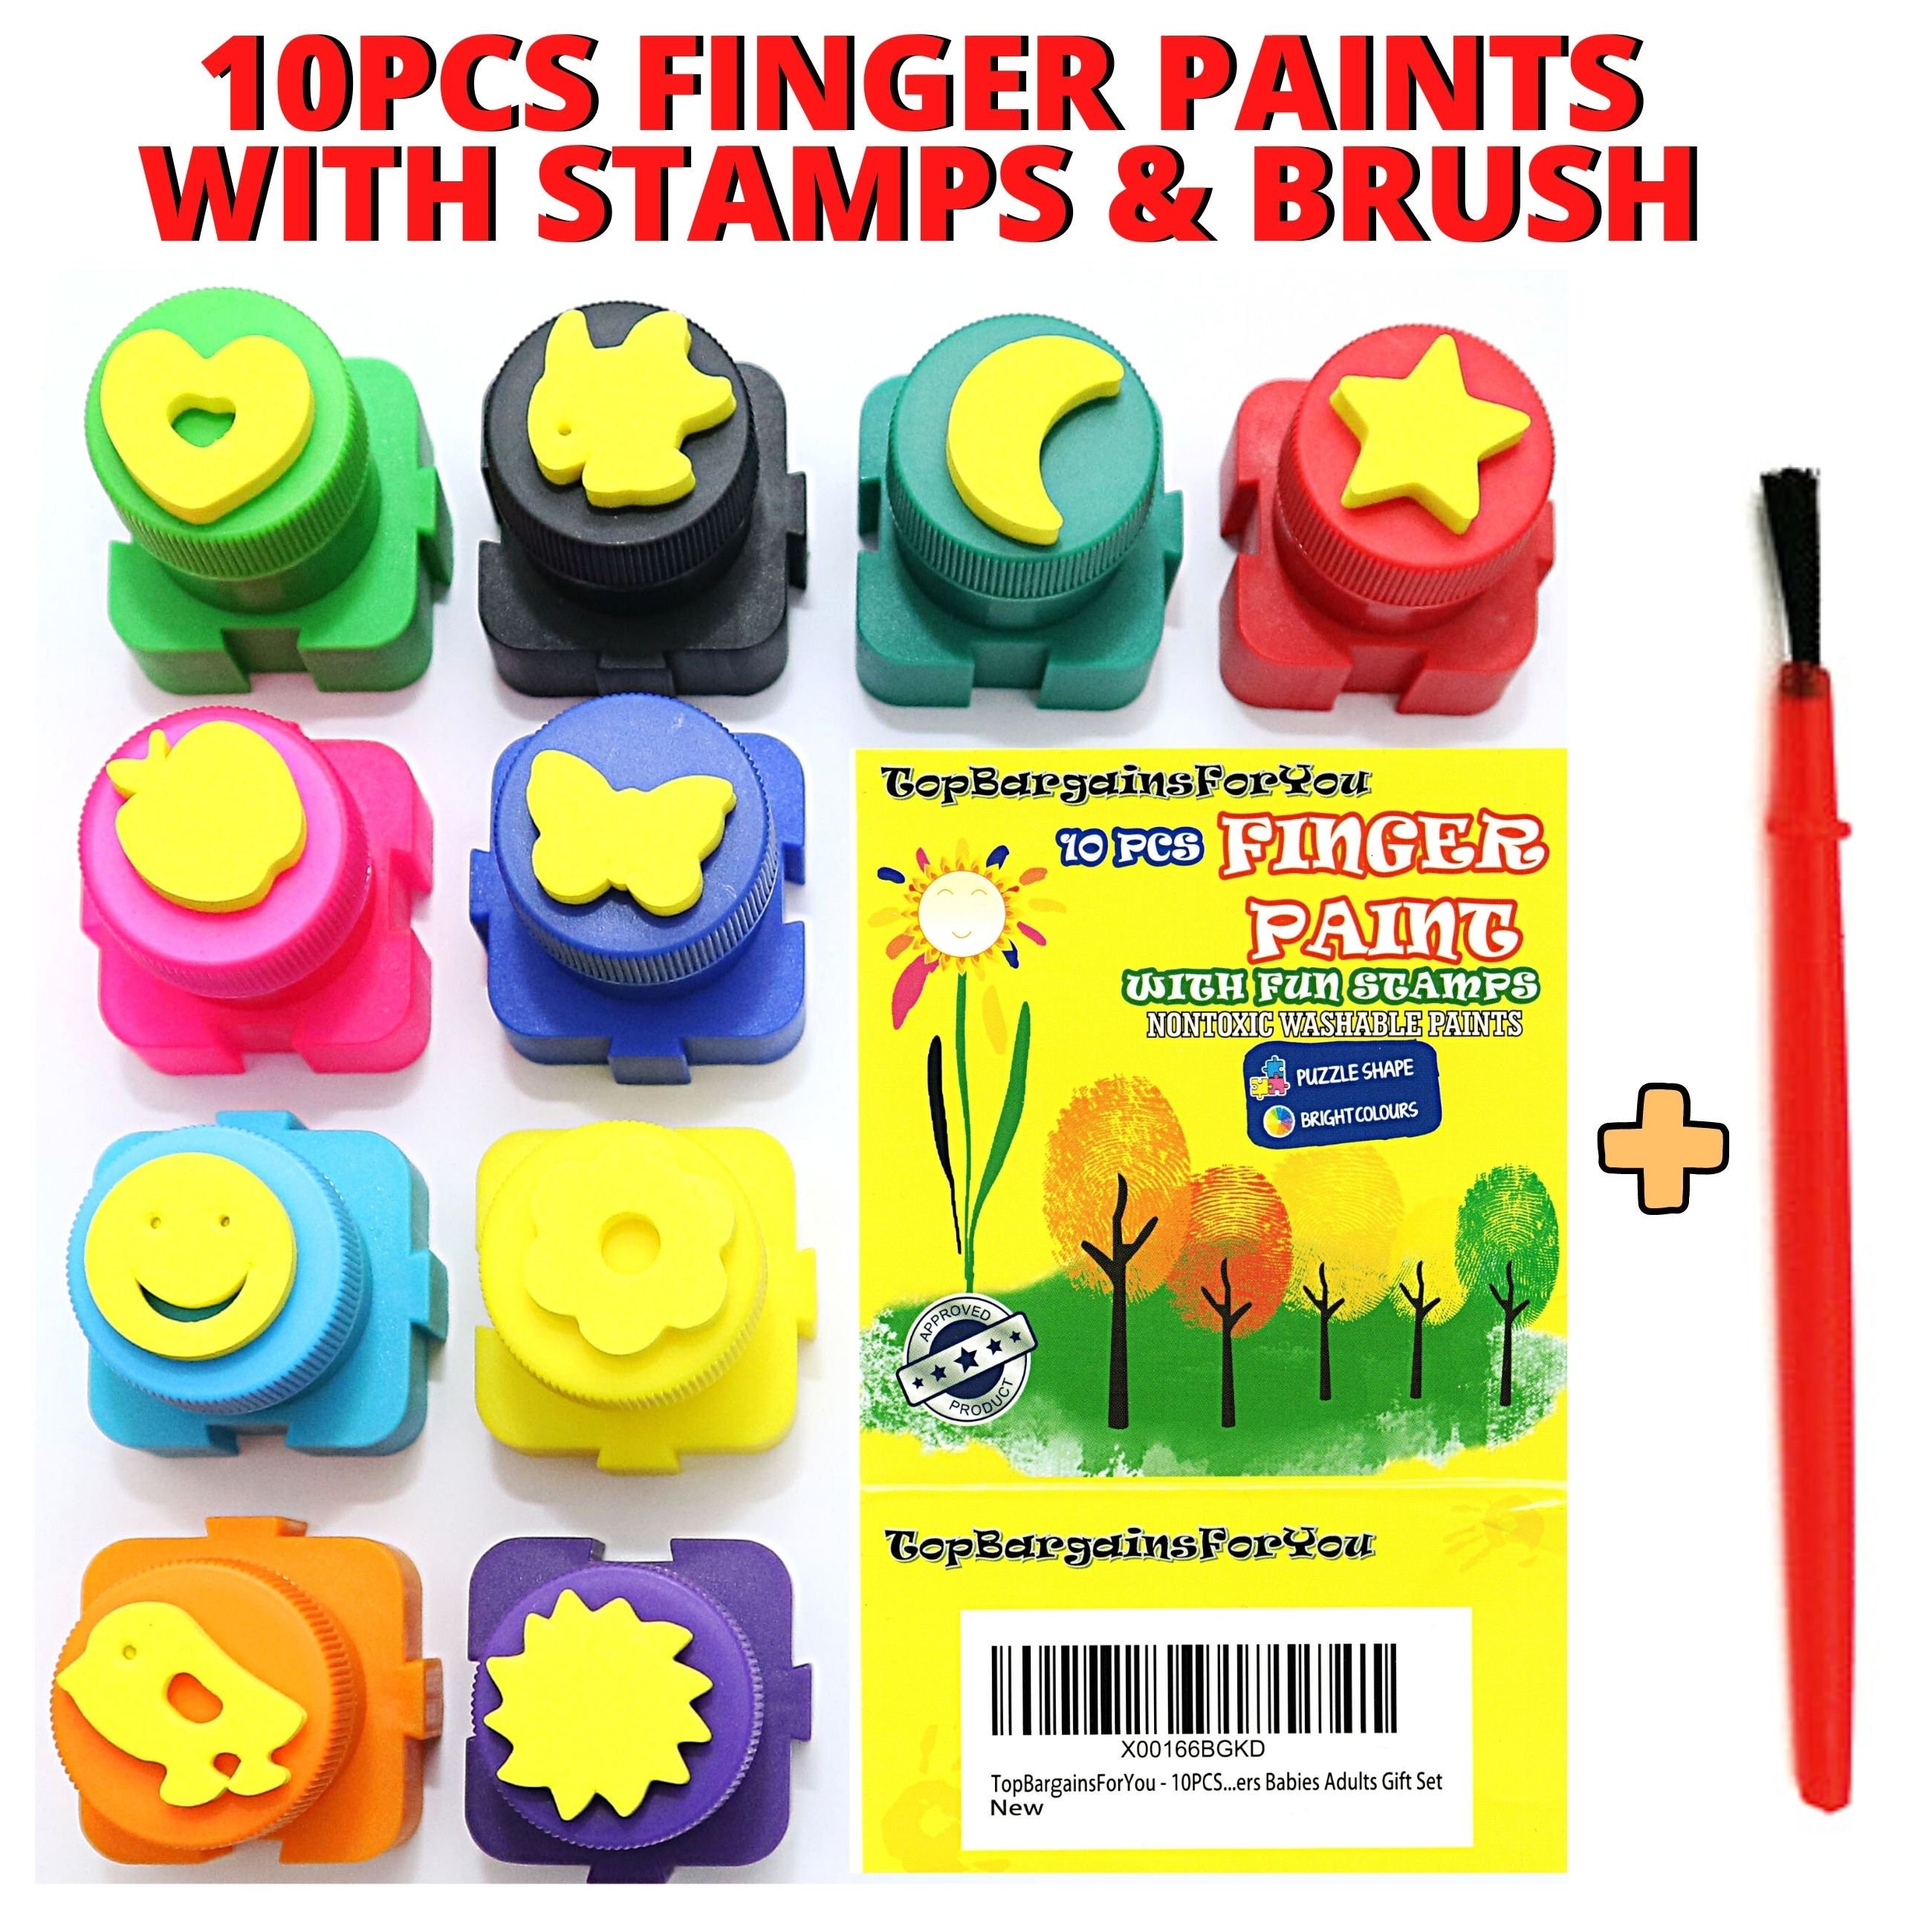 Finger Paint Set for Kids - Toddler painting set includes kids washable  paint and brush set, toddler paint paper pad, finger paint sponges and smock